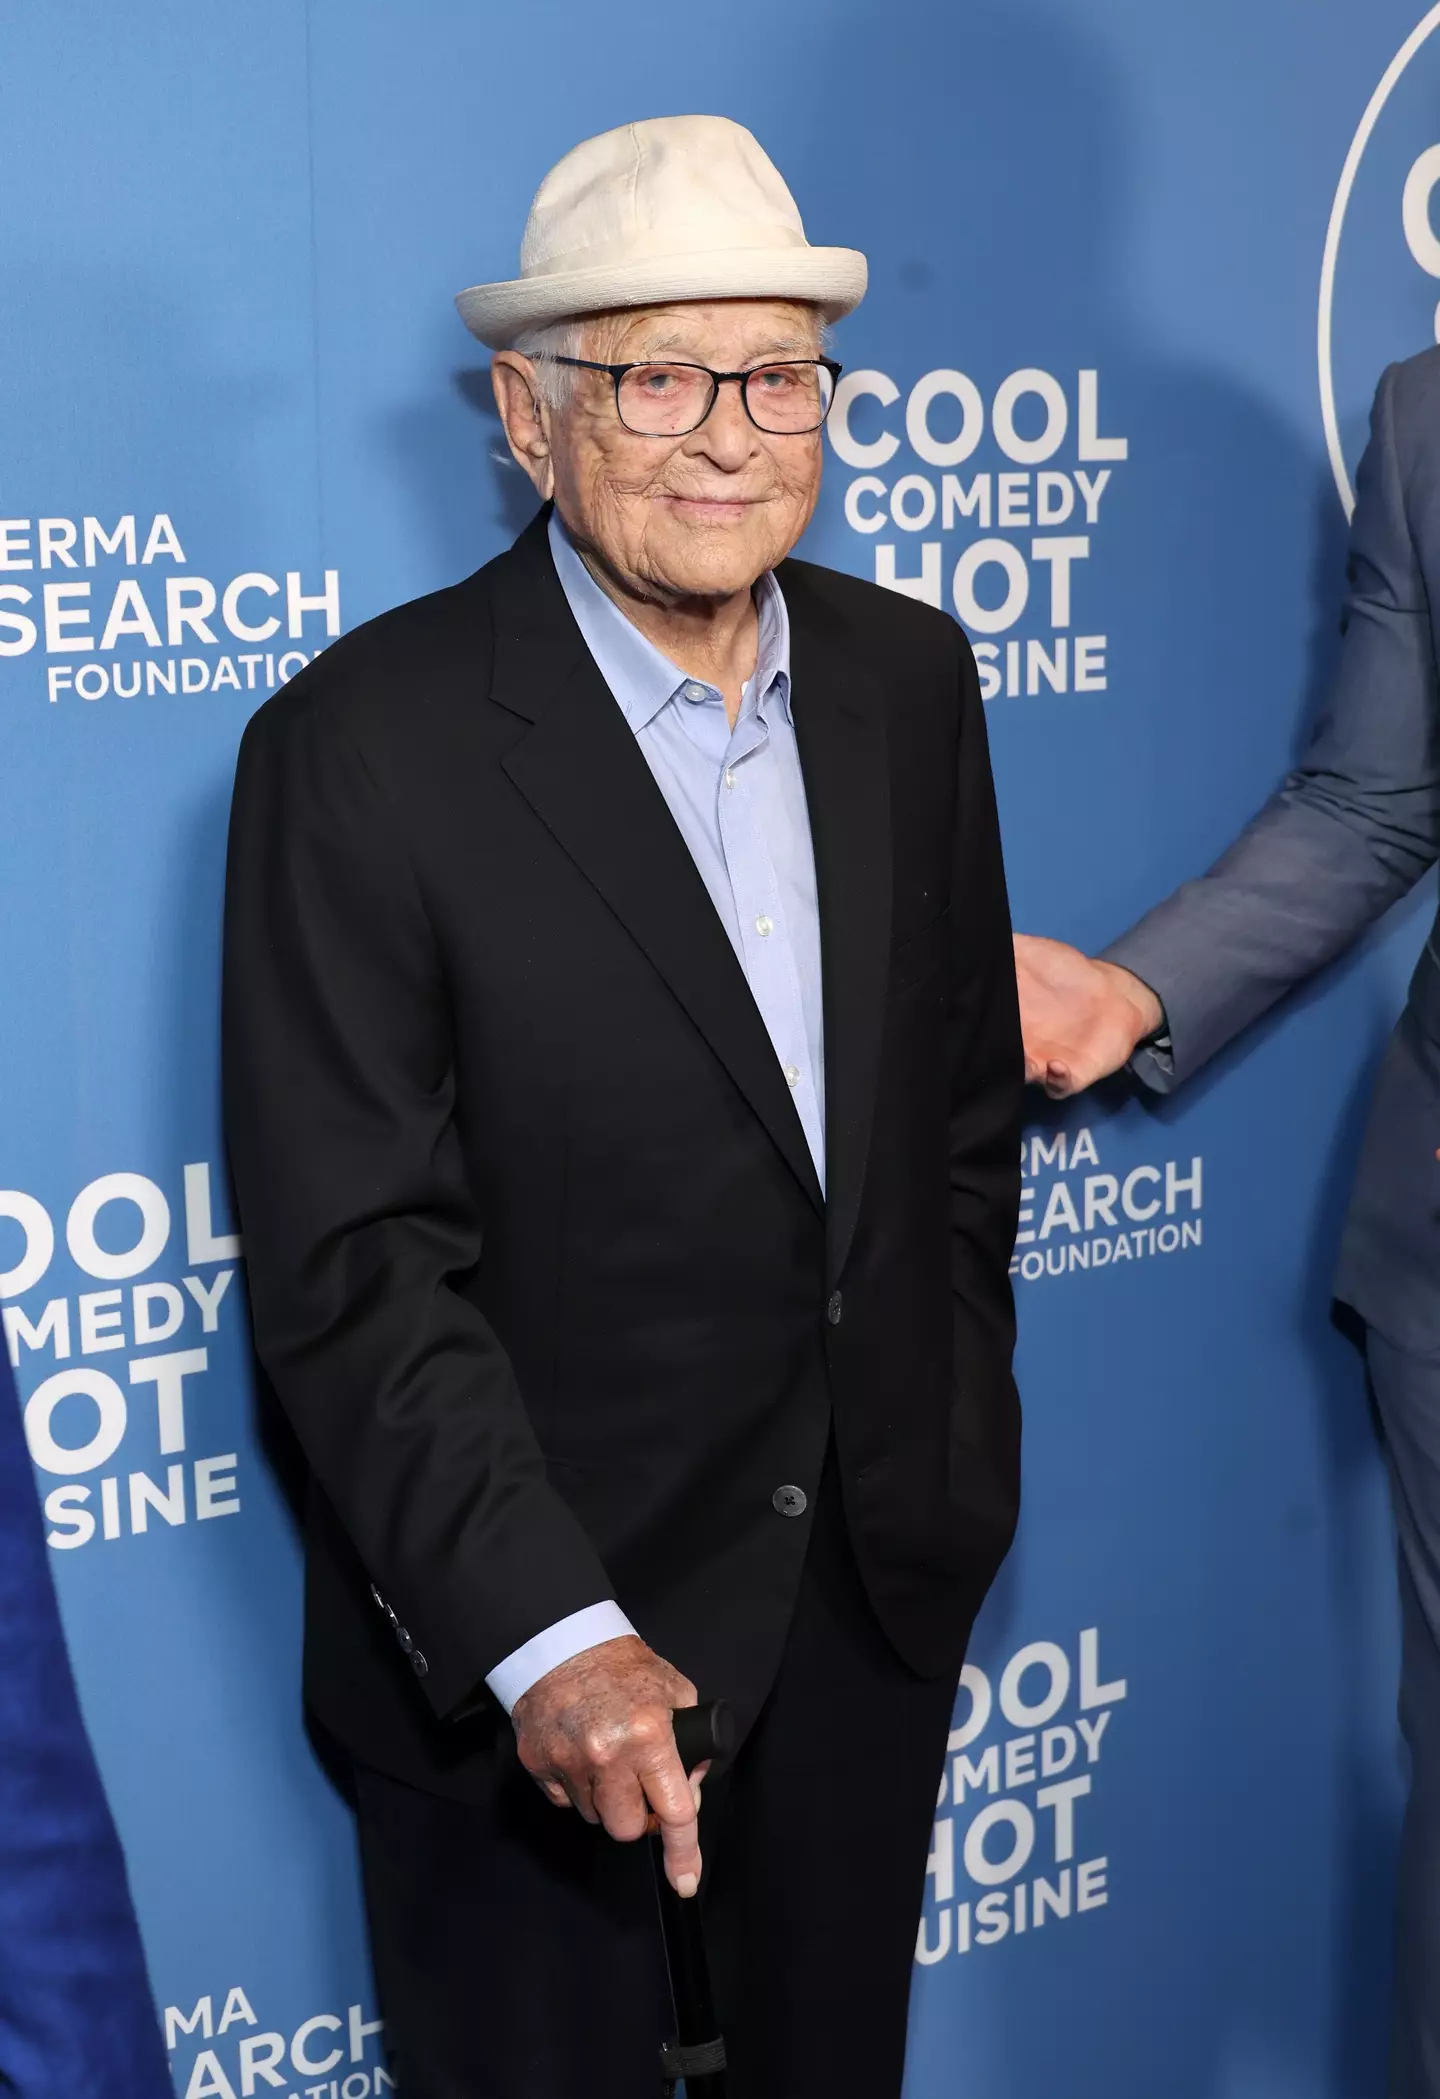 Norman Lear has died at the age of 101.